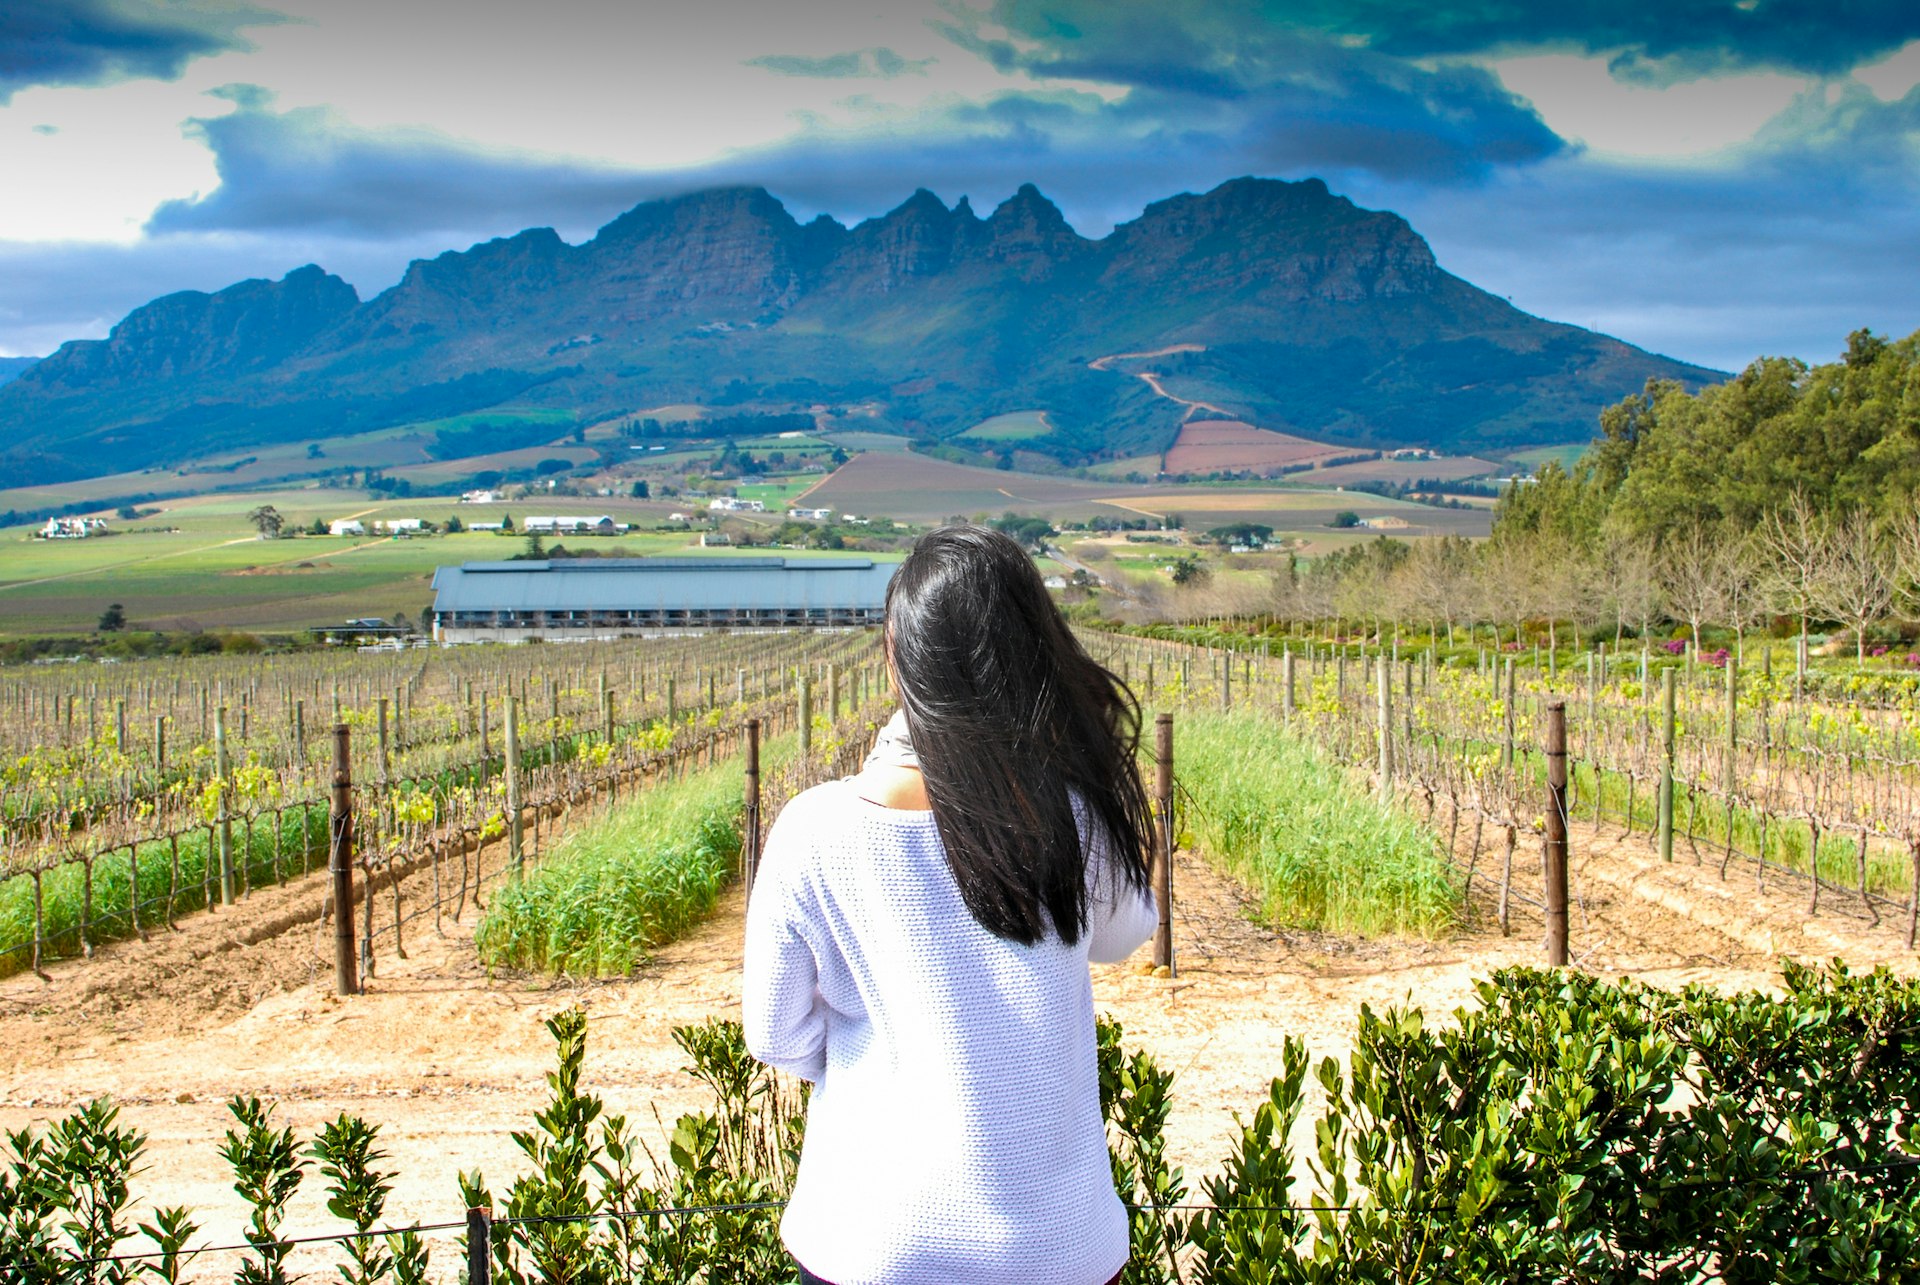 A woman gazes out at a rural landscape covered in vines with a mountain rising in the distance